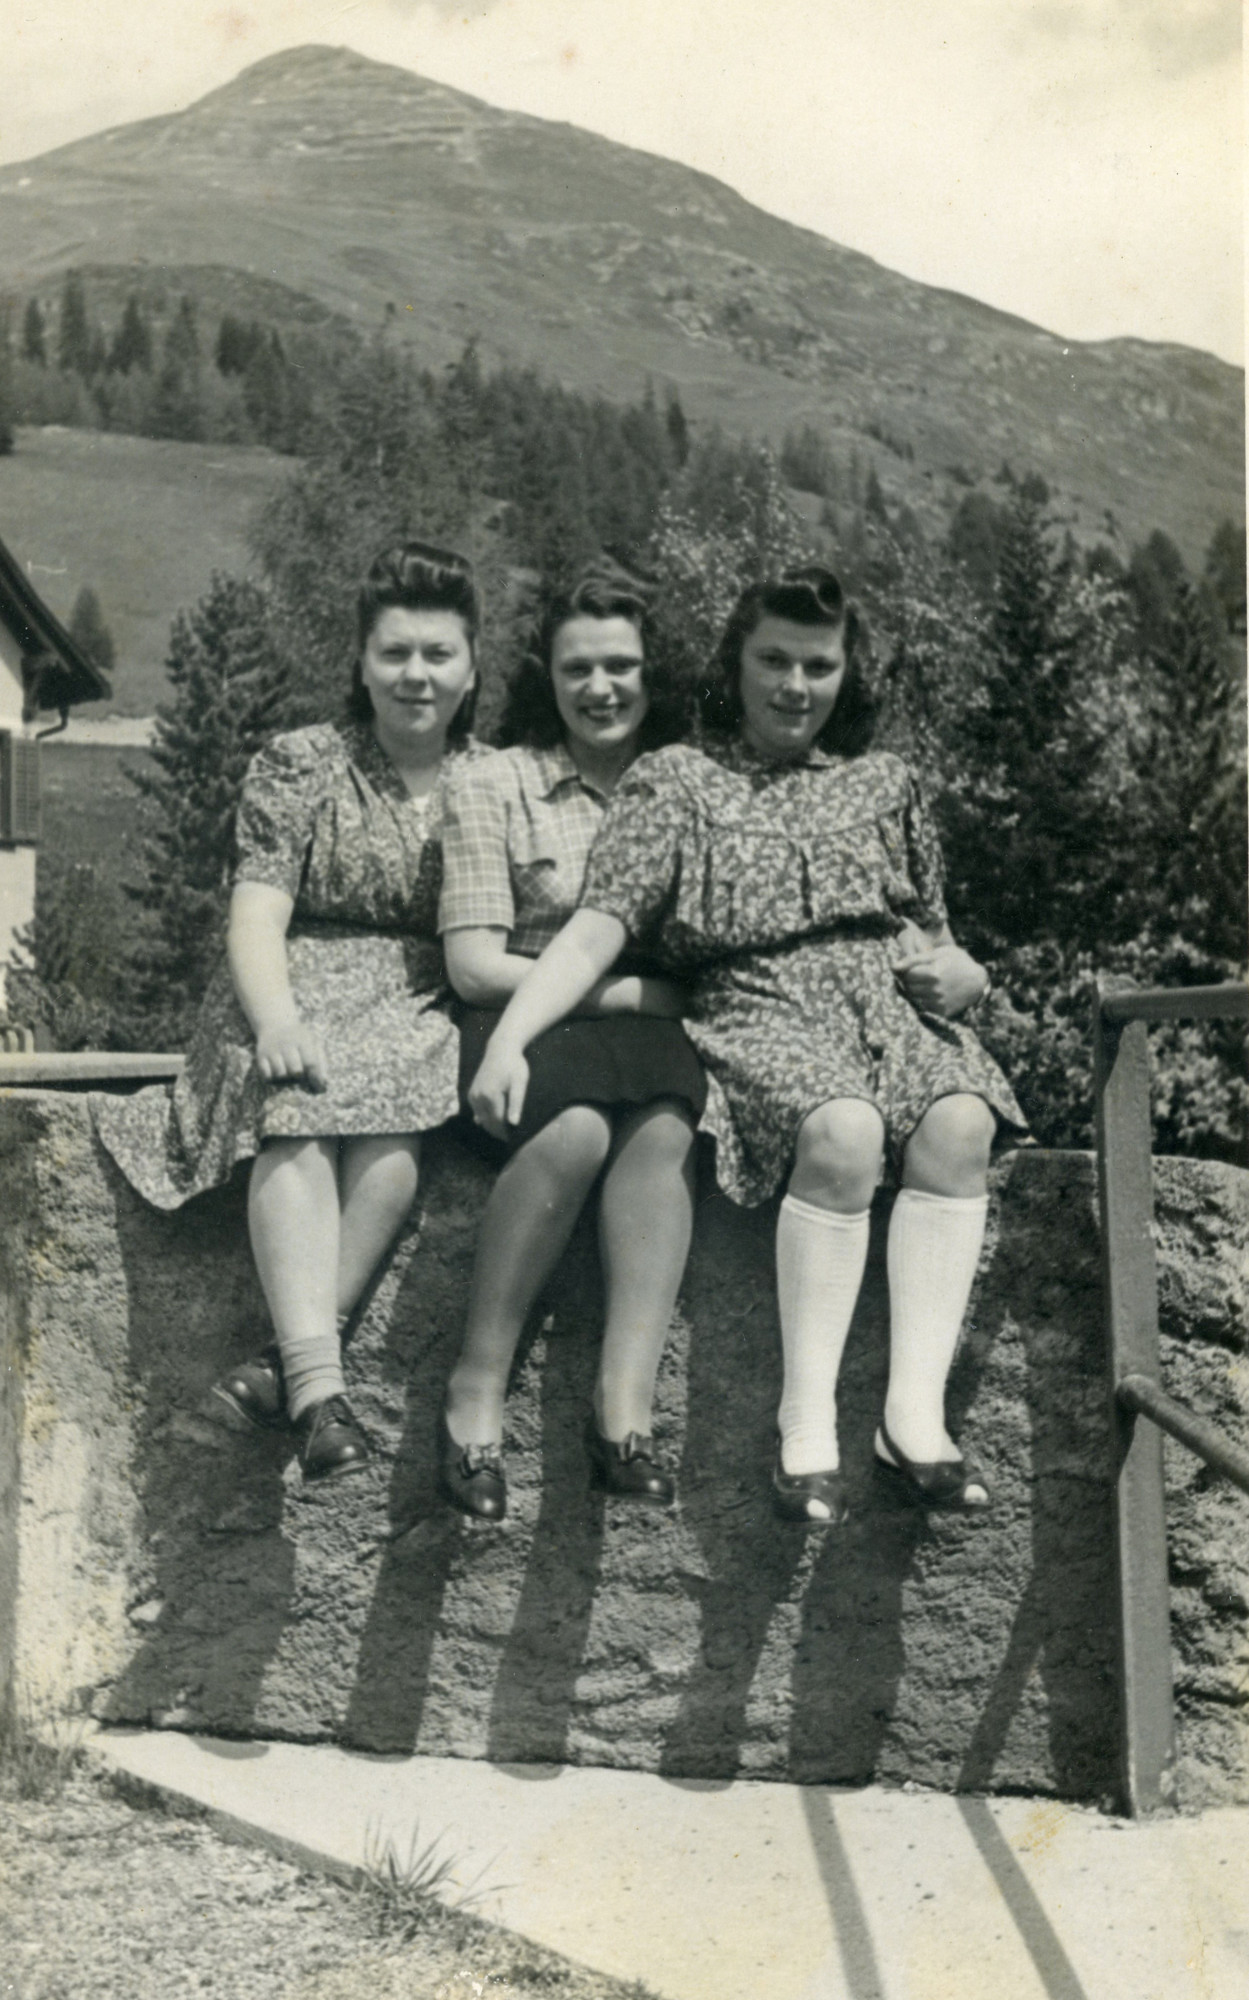 Jewish displaced persons in Davos, Switzerland.

Among those pictured are sisters Helen (Hinde) and Minna Kuperberg (left and right), with their friend Elsa (center).